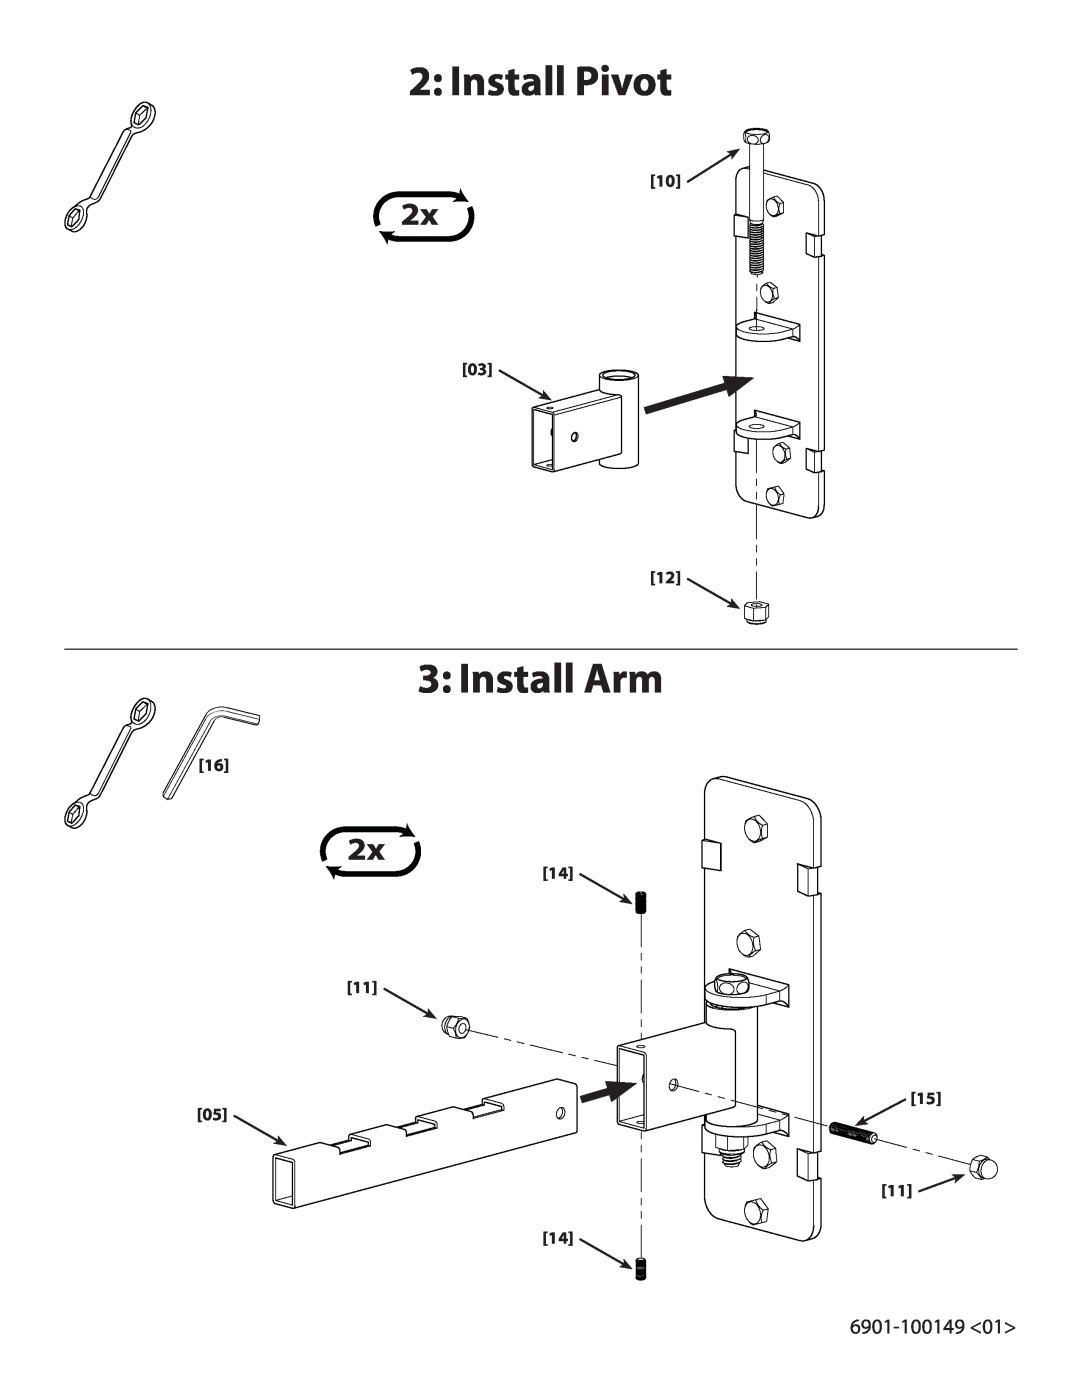 Sanus Systems WMS2 important safety instructions Install Pivot, Install Arm, 14 11 05, 6901-100149 